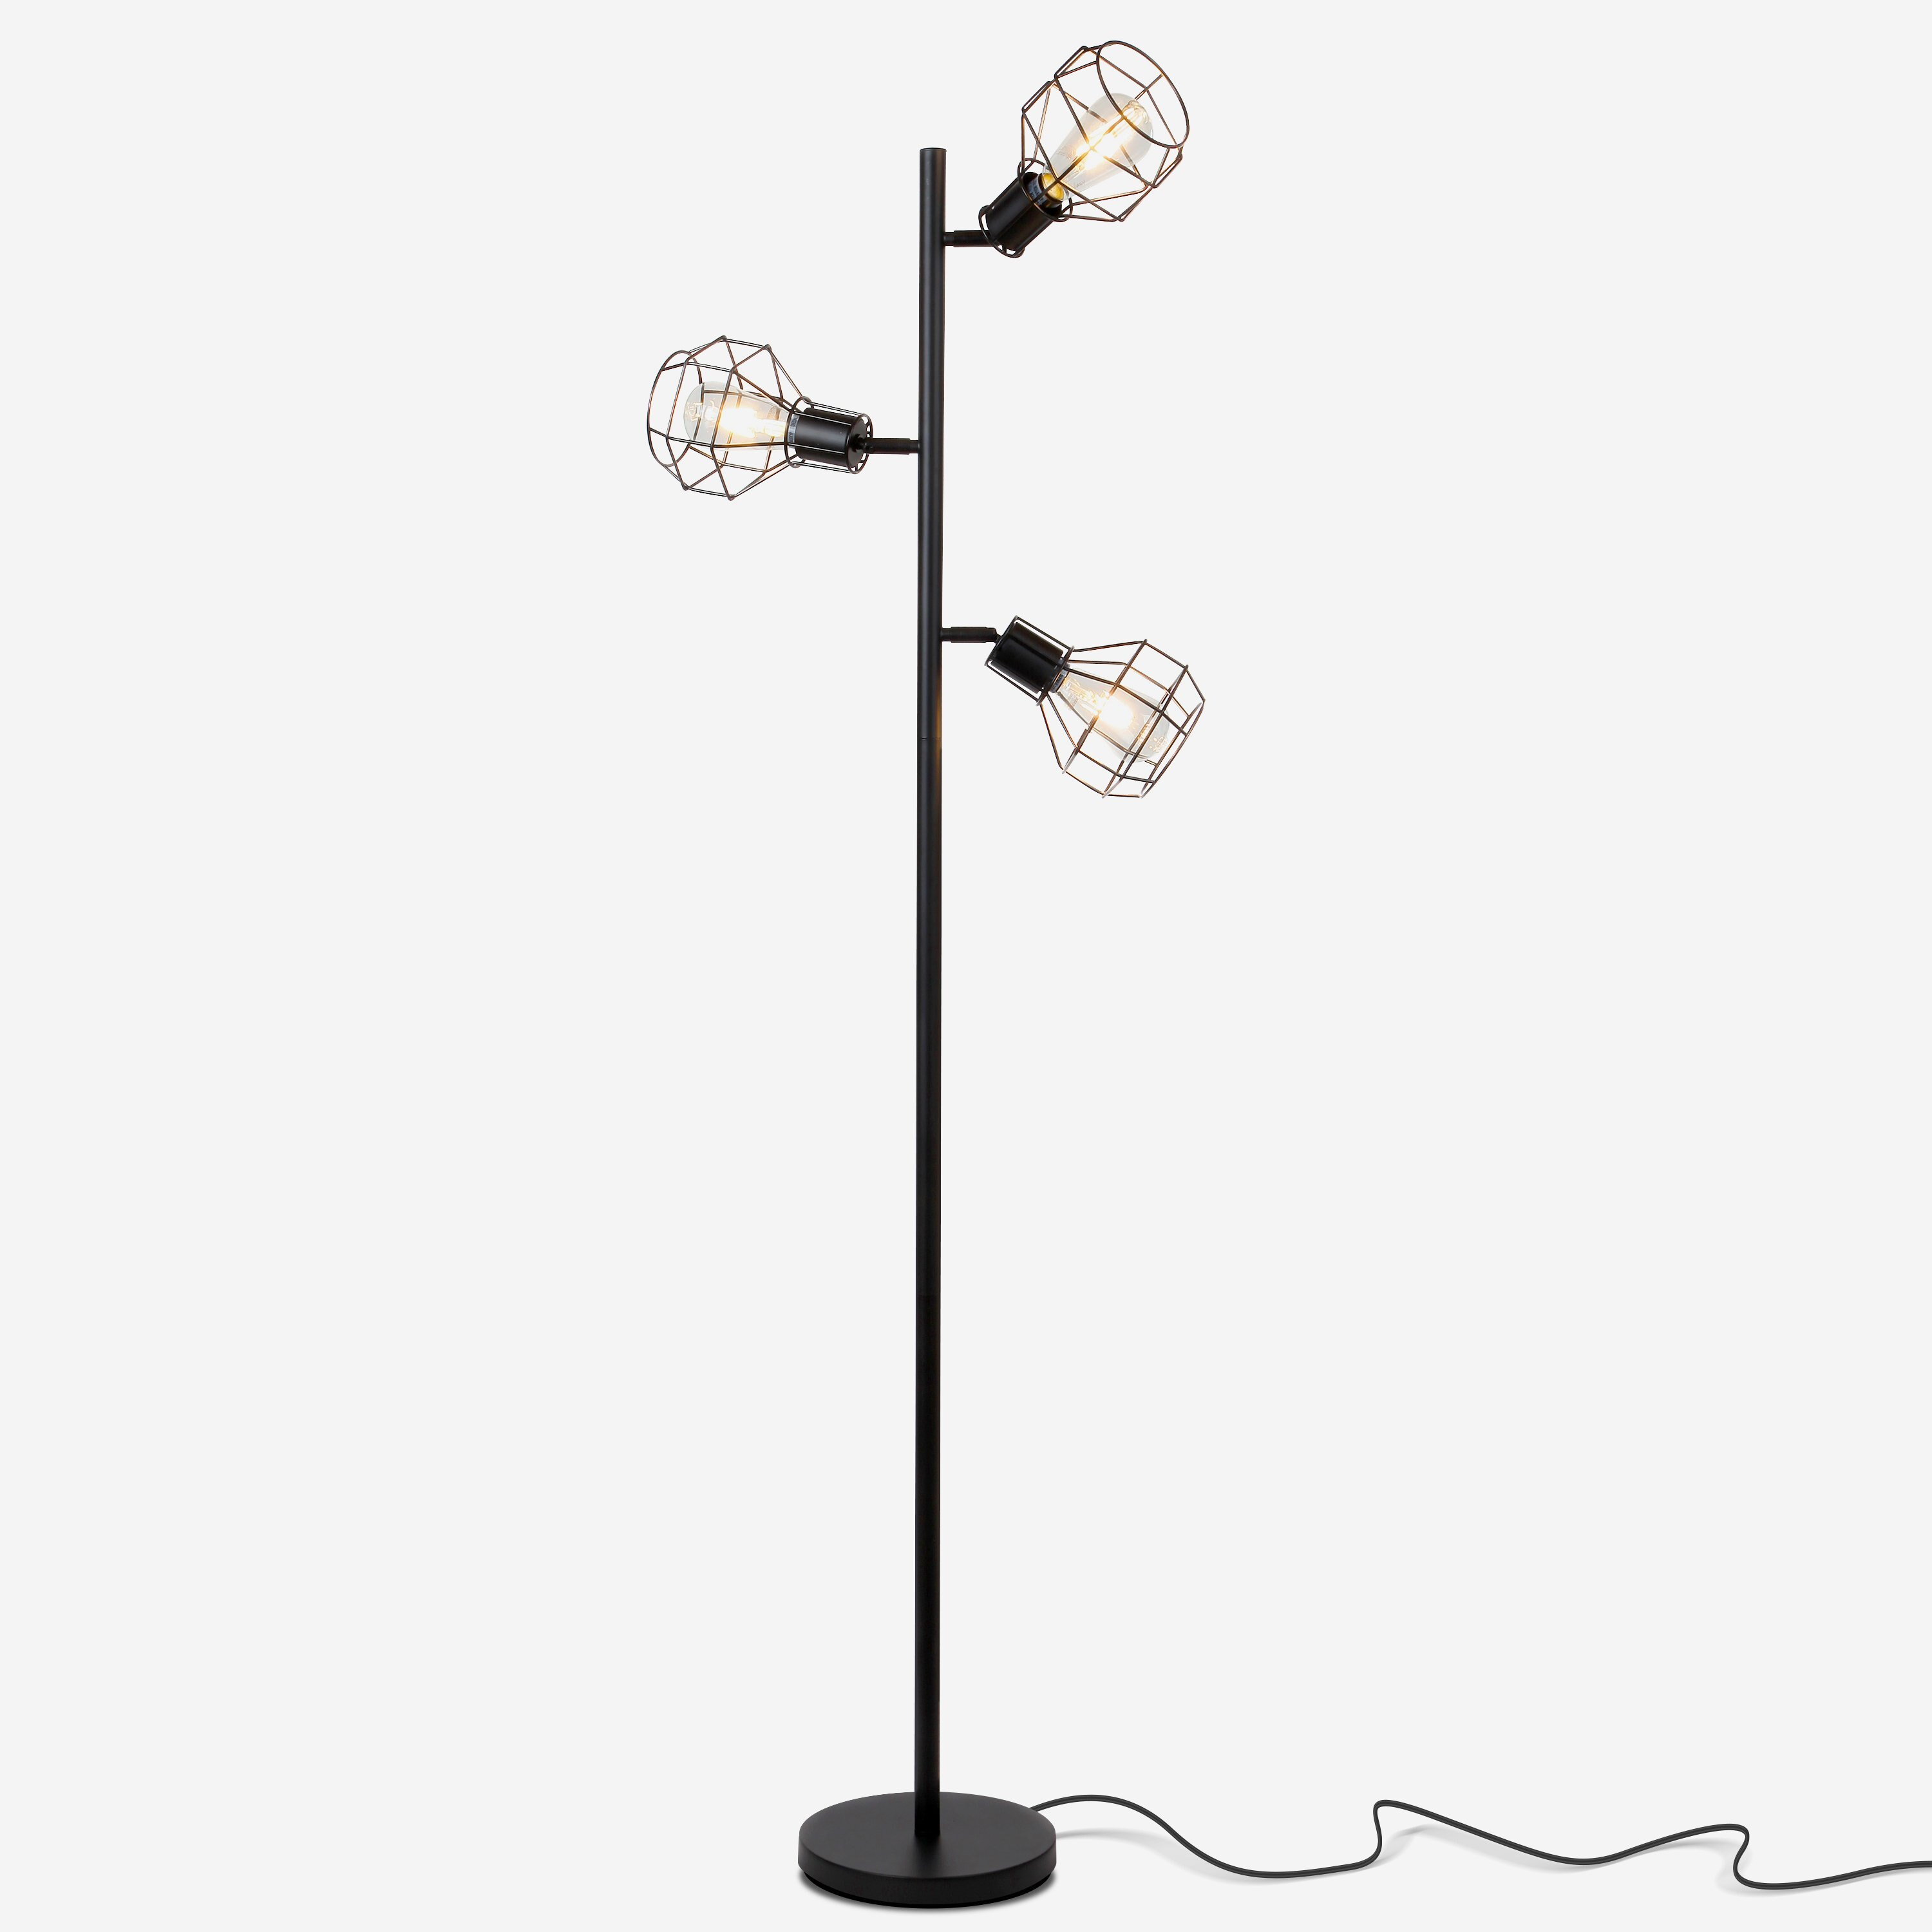 Robin Tree Led Floor Lamp Industrial Modern Style Cage Lantern Shade Tall Free Standing Pole With 3 Vintage Led Light Bulbs Contemporary Bright in size 3000 X 3000